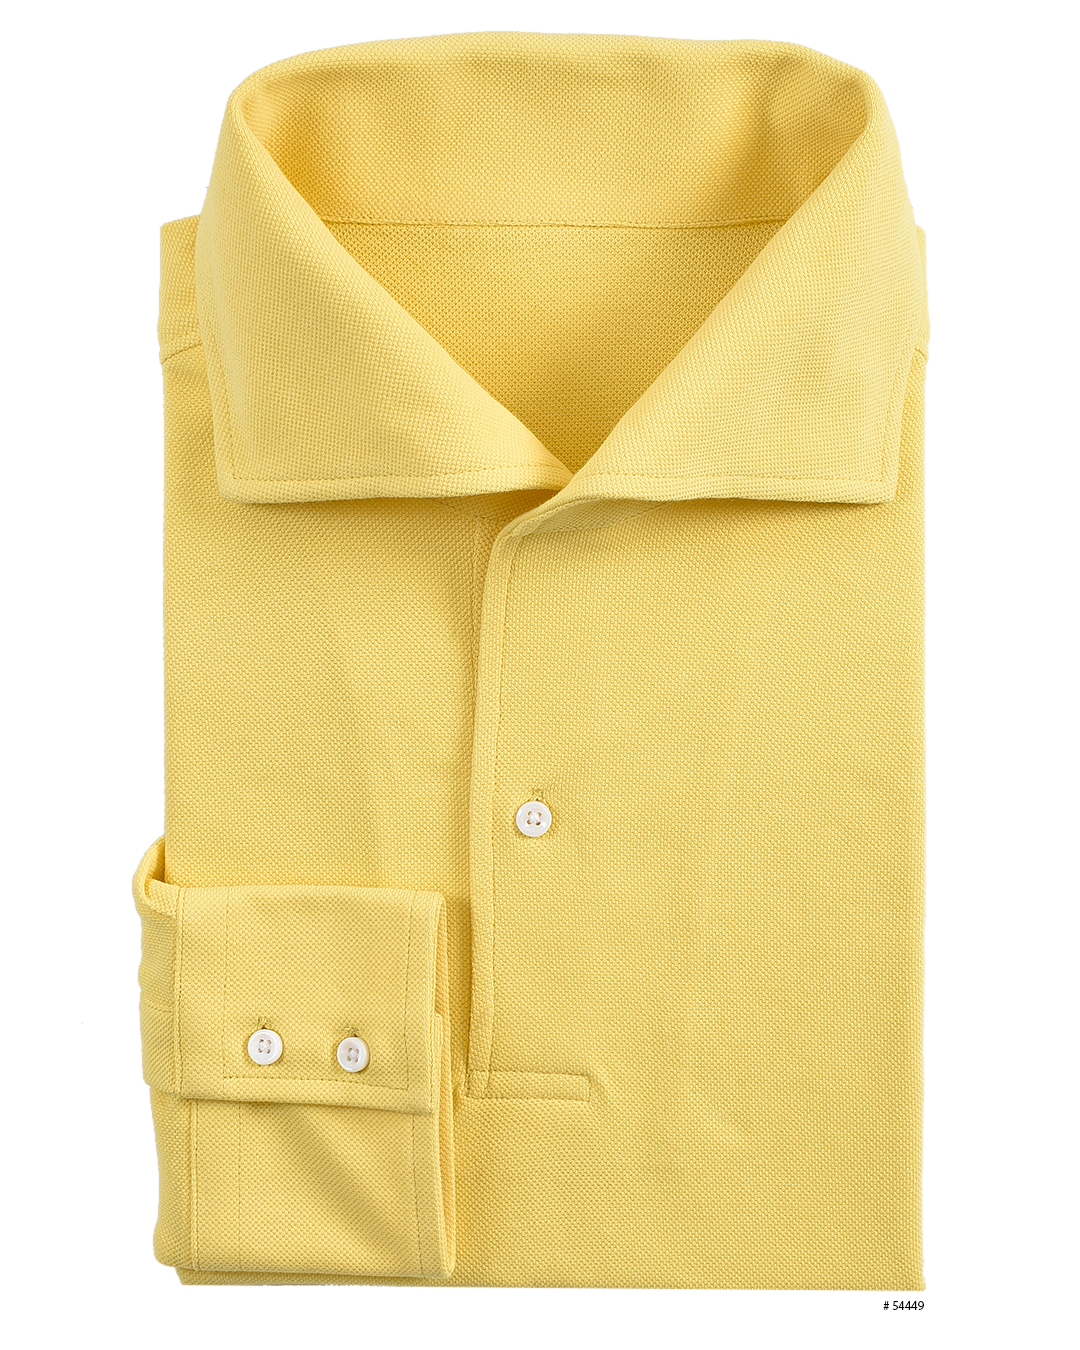 Front of the custom oxford polo shirt for men by Luxire in light yellow